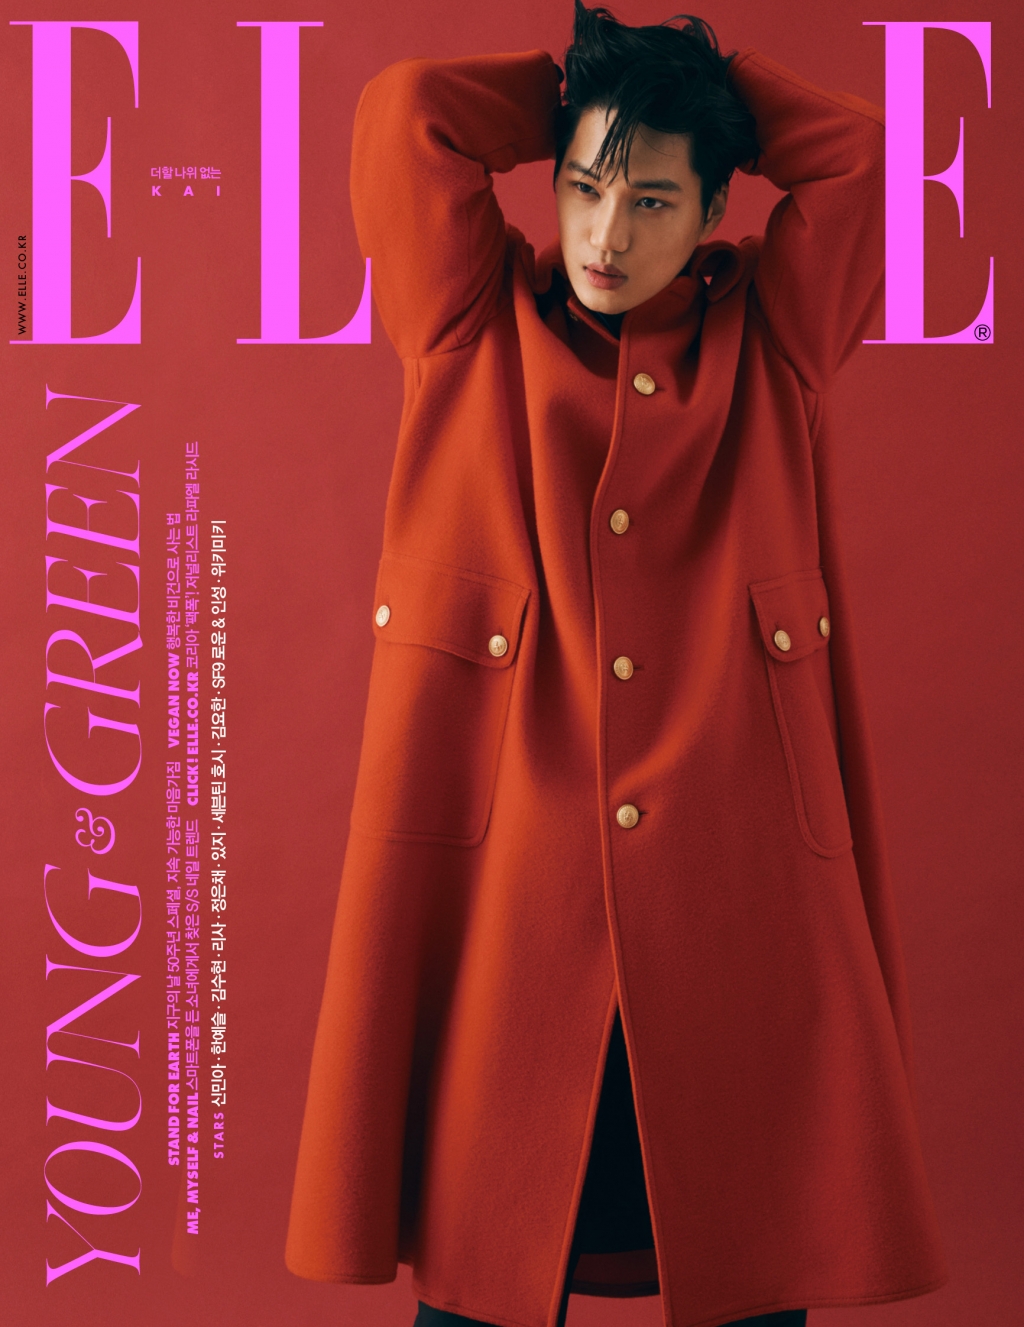 Italian brand Gucci has unveiled a fashion picture with Kai of the group EXO.Recently EXO Kai participated in a fashion pictorial with Gucci and Elle Korea, who posed in Guccis 2020 Spring Summer Collection.Kai in the picture is wearing a psychedelic G jacket and pants with margarine orange multicolors, where Kai emphasized his height in black boots heels.A boyish smile attracts Eye-catching.In the cover cut, Kai wore a red flare wool coat, which she perfectly digested in an original pose.Kai is working as a global campaign model for Gucci Eyewear, which will continue Guccis activities as House Ambassador.